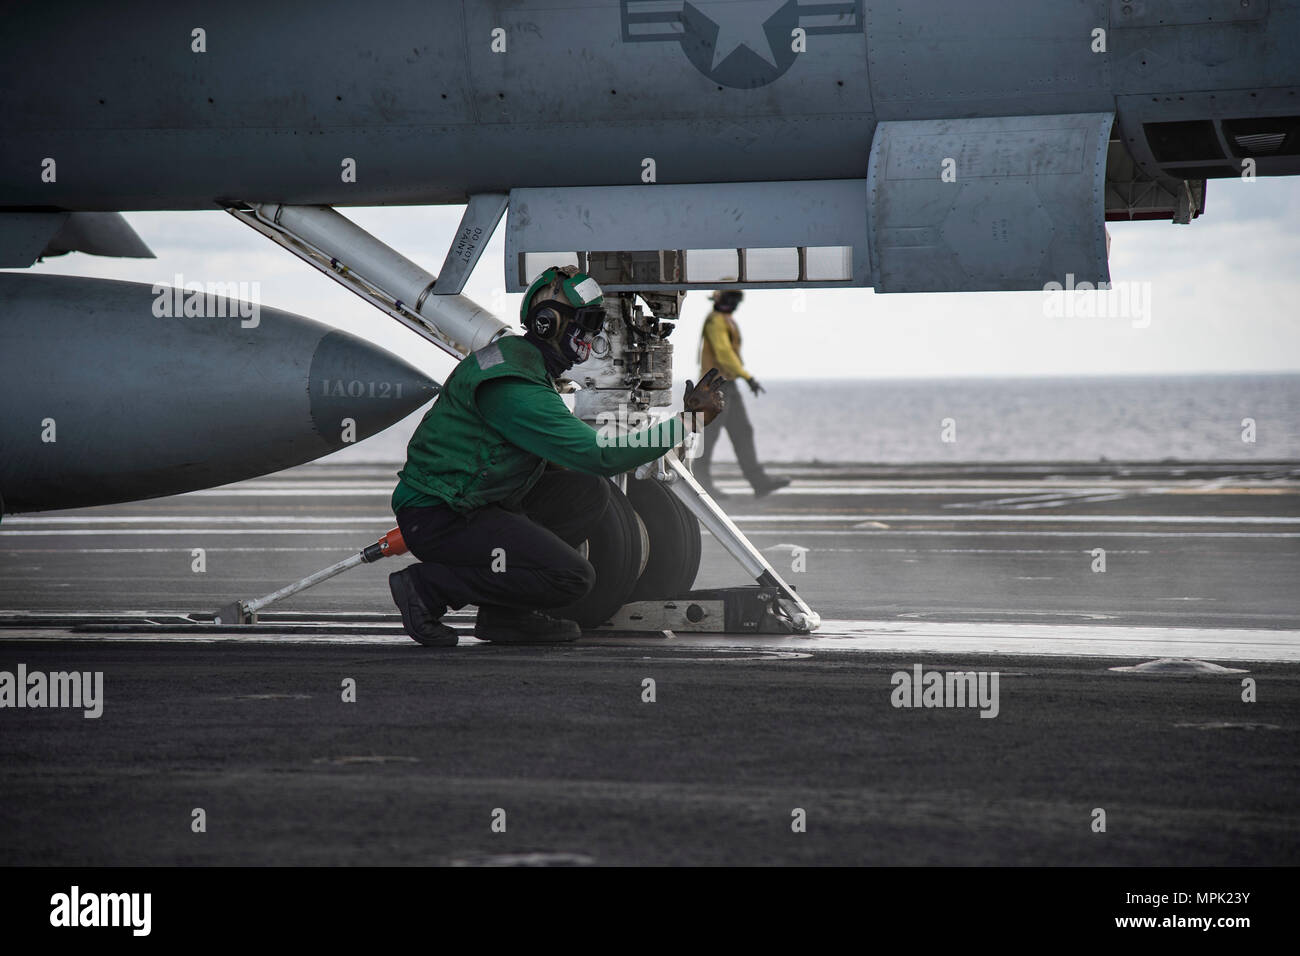 170207-N-OS569-287    ATLANTIC OCEAN (Feb 7, 2017) Aviation Boatswain’s Mate 3rd Class (Equipment) Dominic Aring, inspects the landing gear of an F/A-18E Super Hornet assigned to the Gladiators of Strike Fighter Squadron (VFA) 106 as it prepares to launch from the flight deck of the aircraft carrier USS Dwight D. Eisenhower (CVN 69) (Ike). Ike is currently conducting aircraft carrier qualifications during the Sustainment Phase of the Optimized Fleet Response Plan (OFRP). (U.S. Navy photo by Mass Communication Specialist Seaman Zach Sleeper) Stock Photo